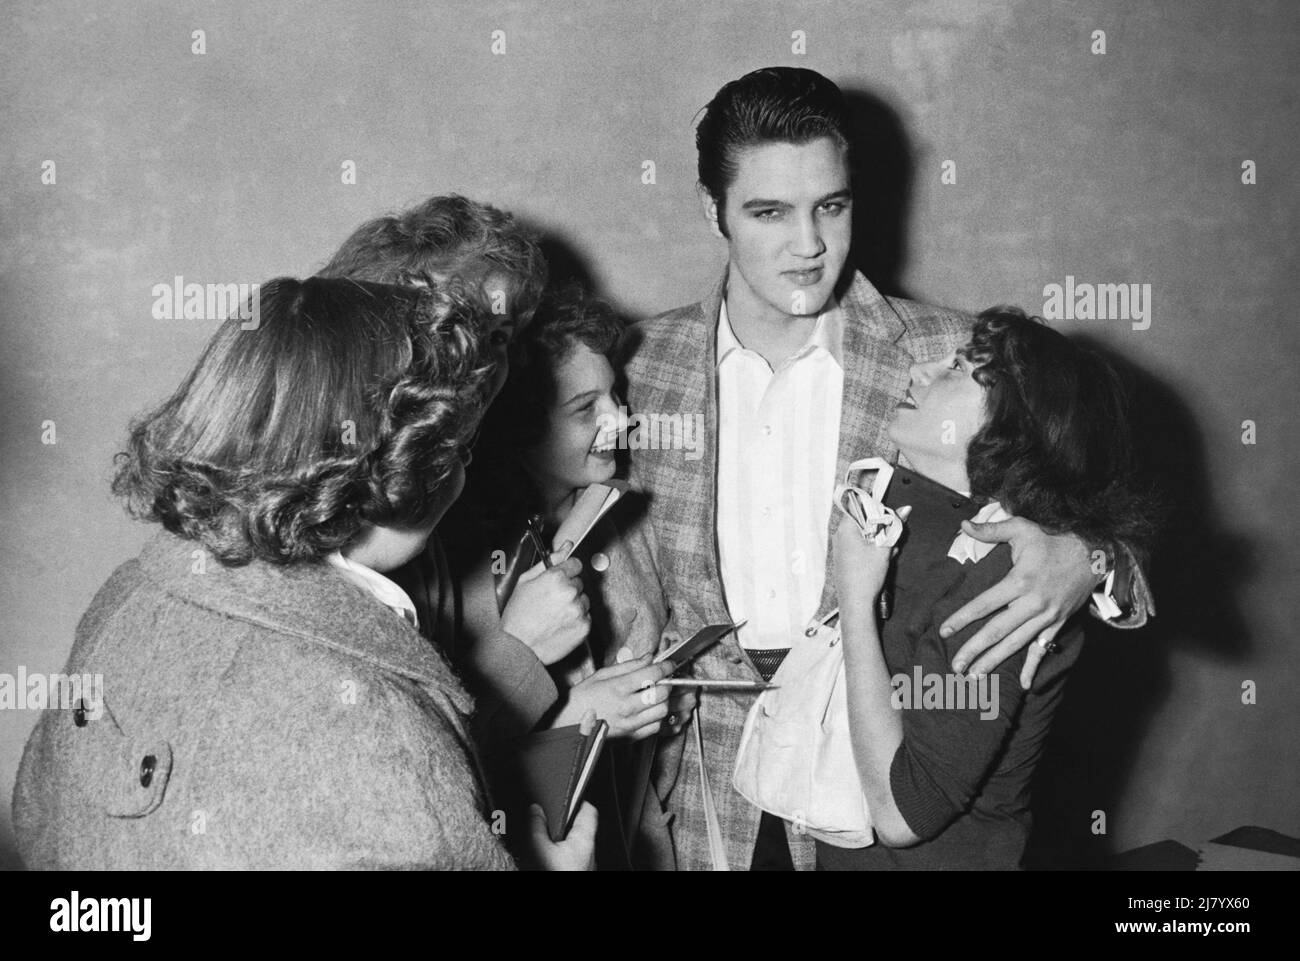 Elvis and Fans, c. 1955 Stock Photo